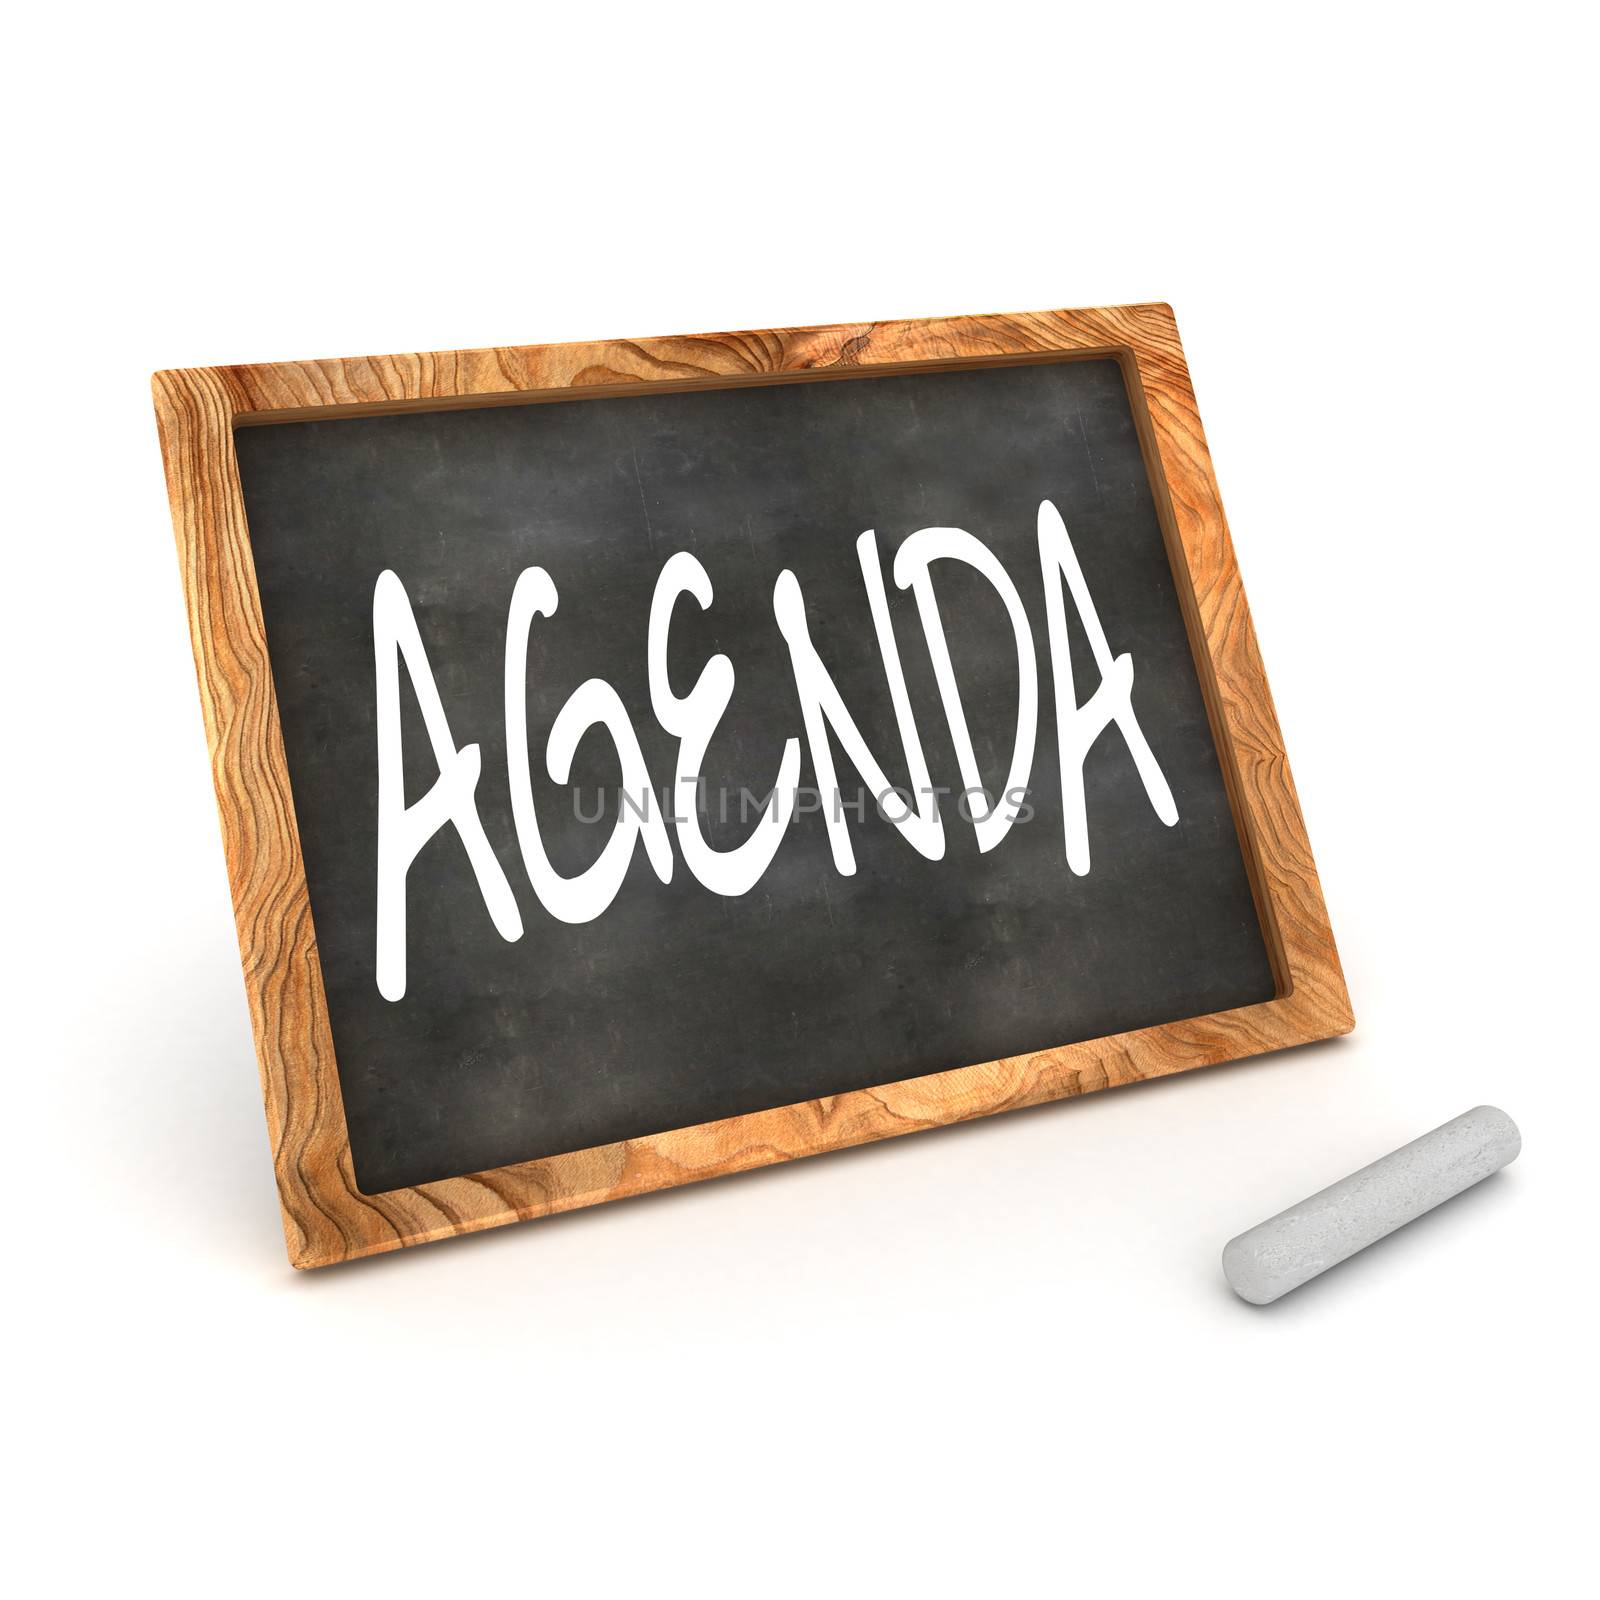 A Colourful 3d Rendered Concept Illustration showing "Agenda" writen on a Blackboard with white chalk